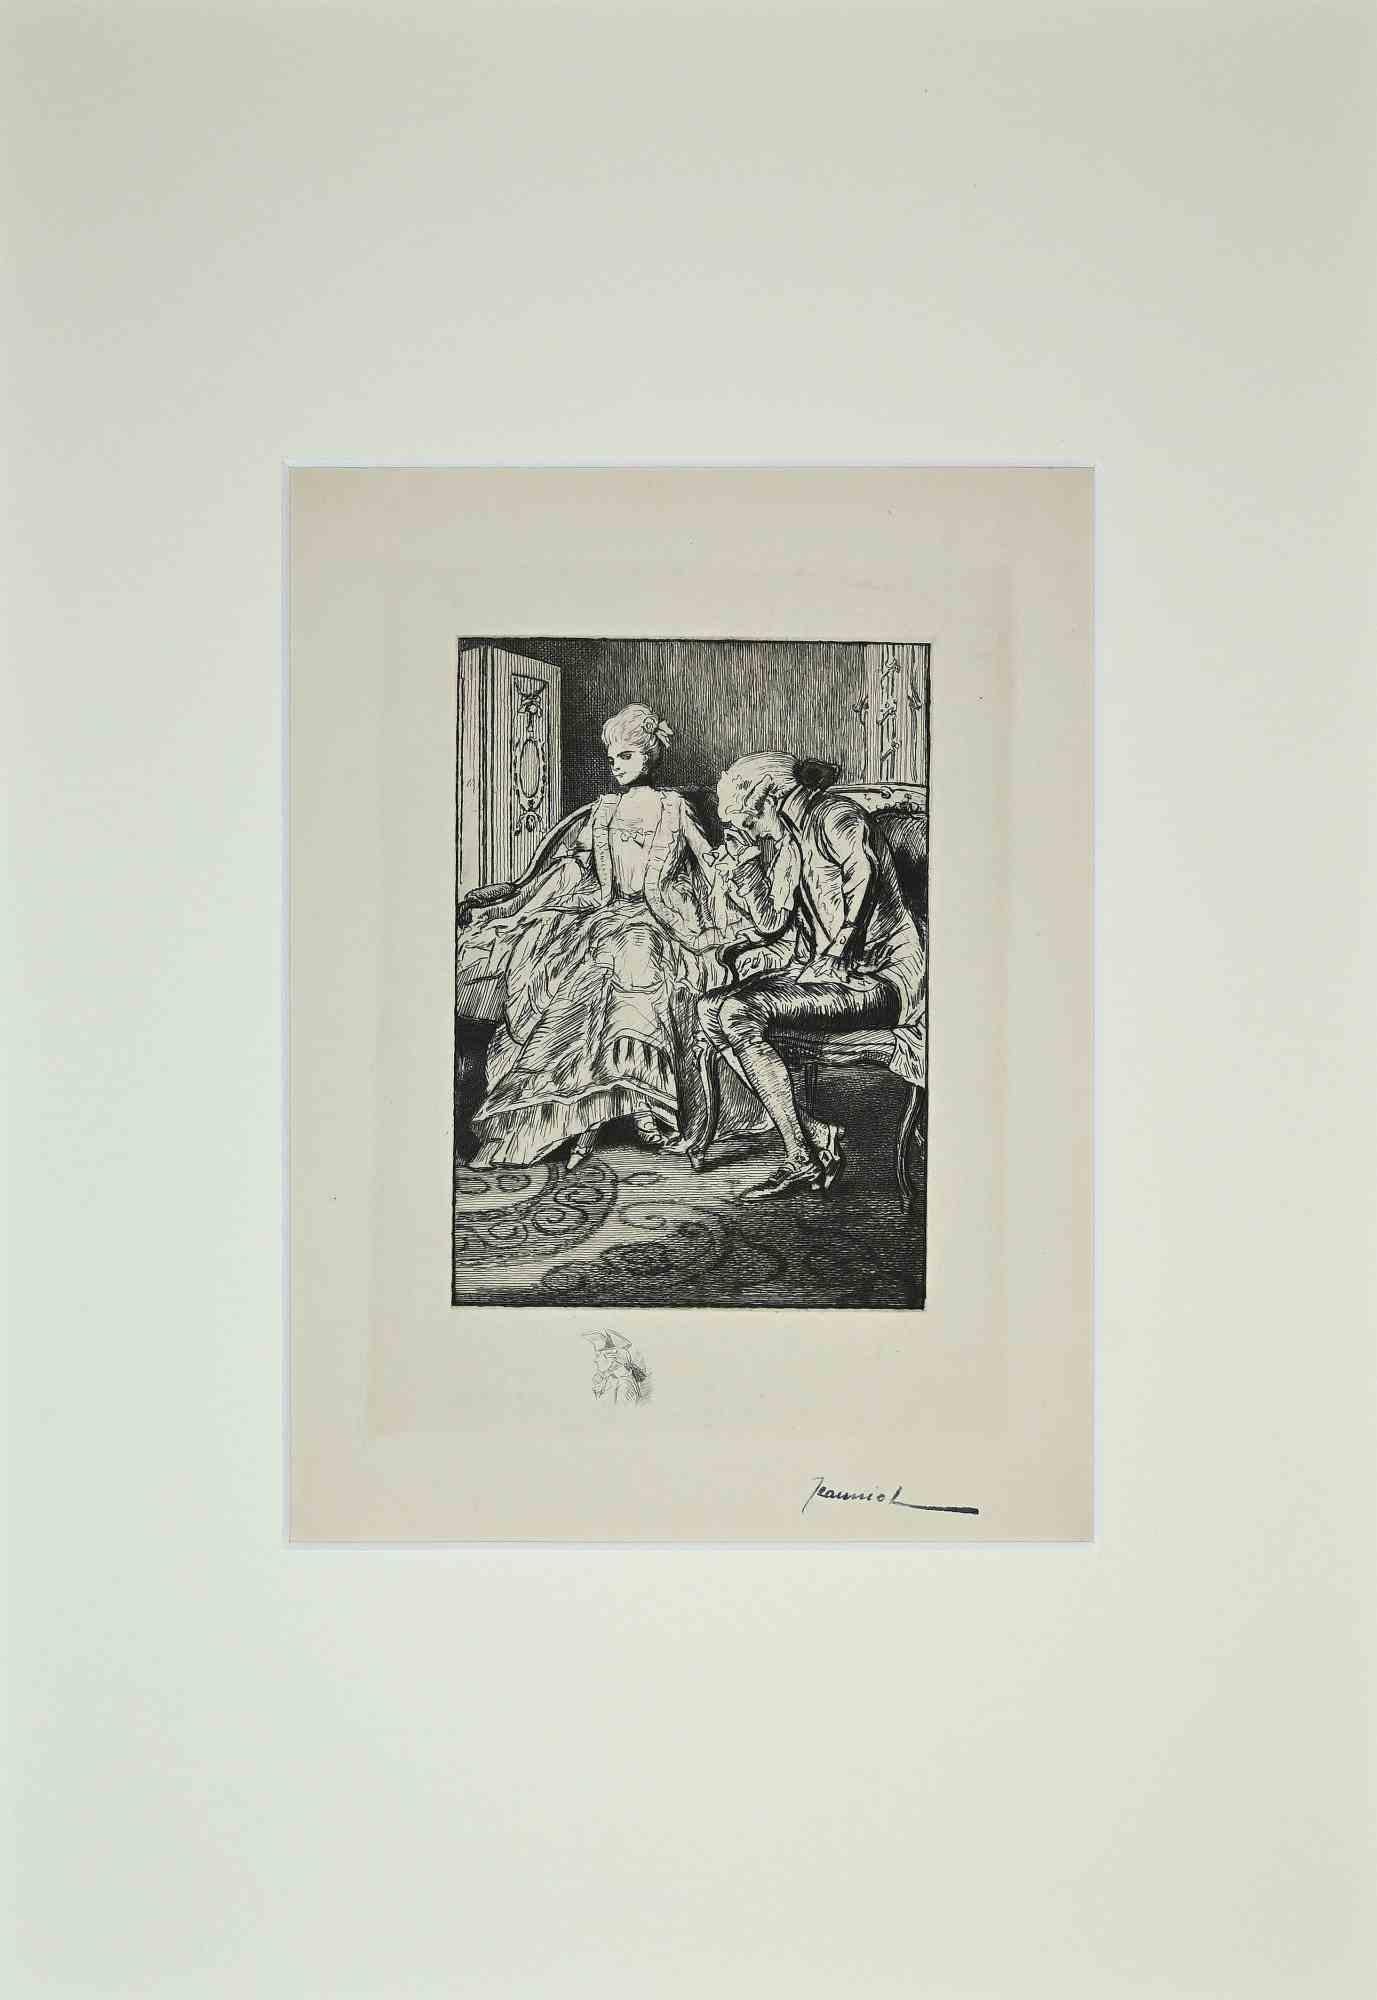 Pierre Georges Jeanniot Figurative Print - The Life of Casanova - Etching by G. Jeanniot - Early 20th Century